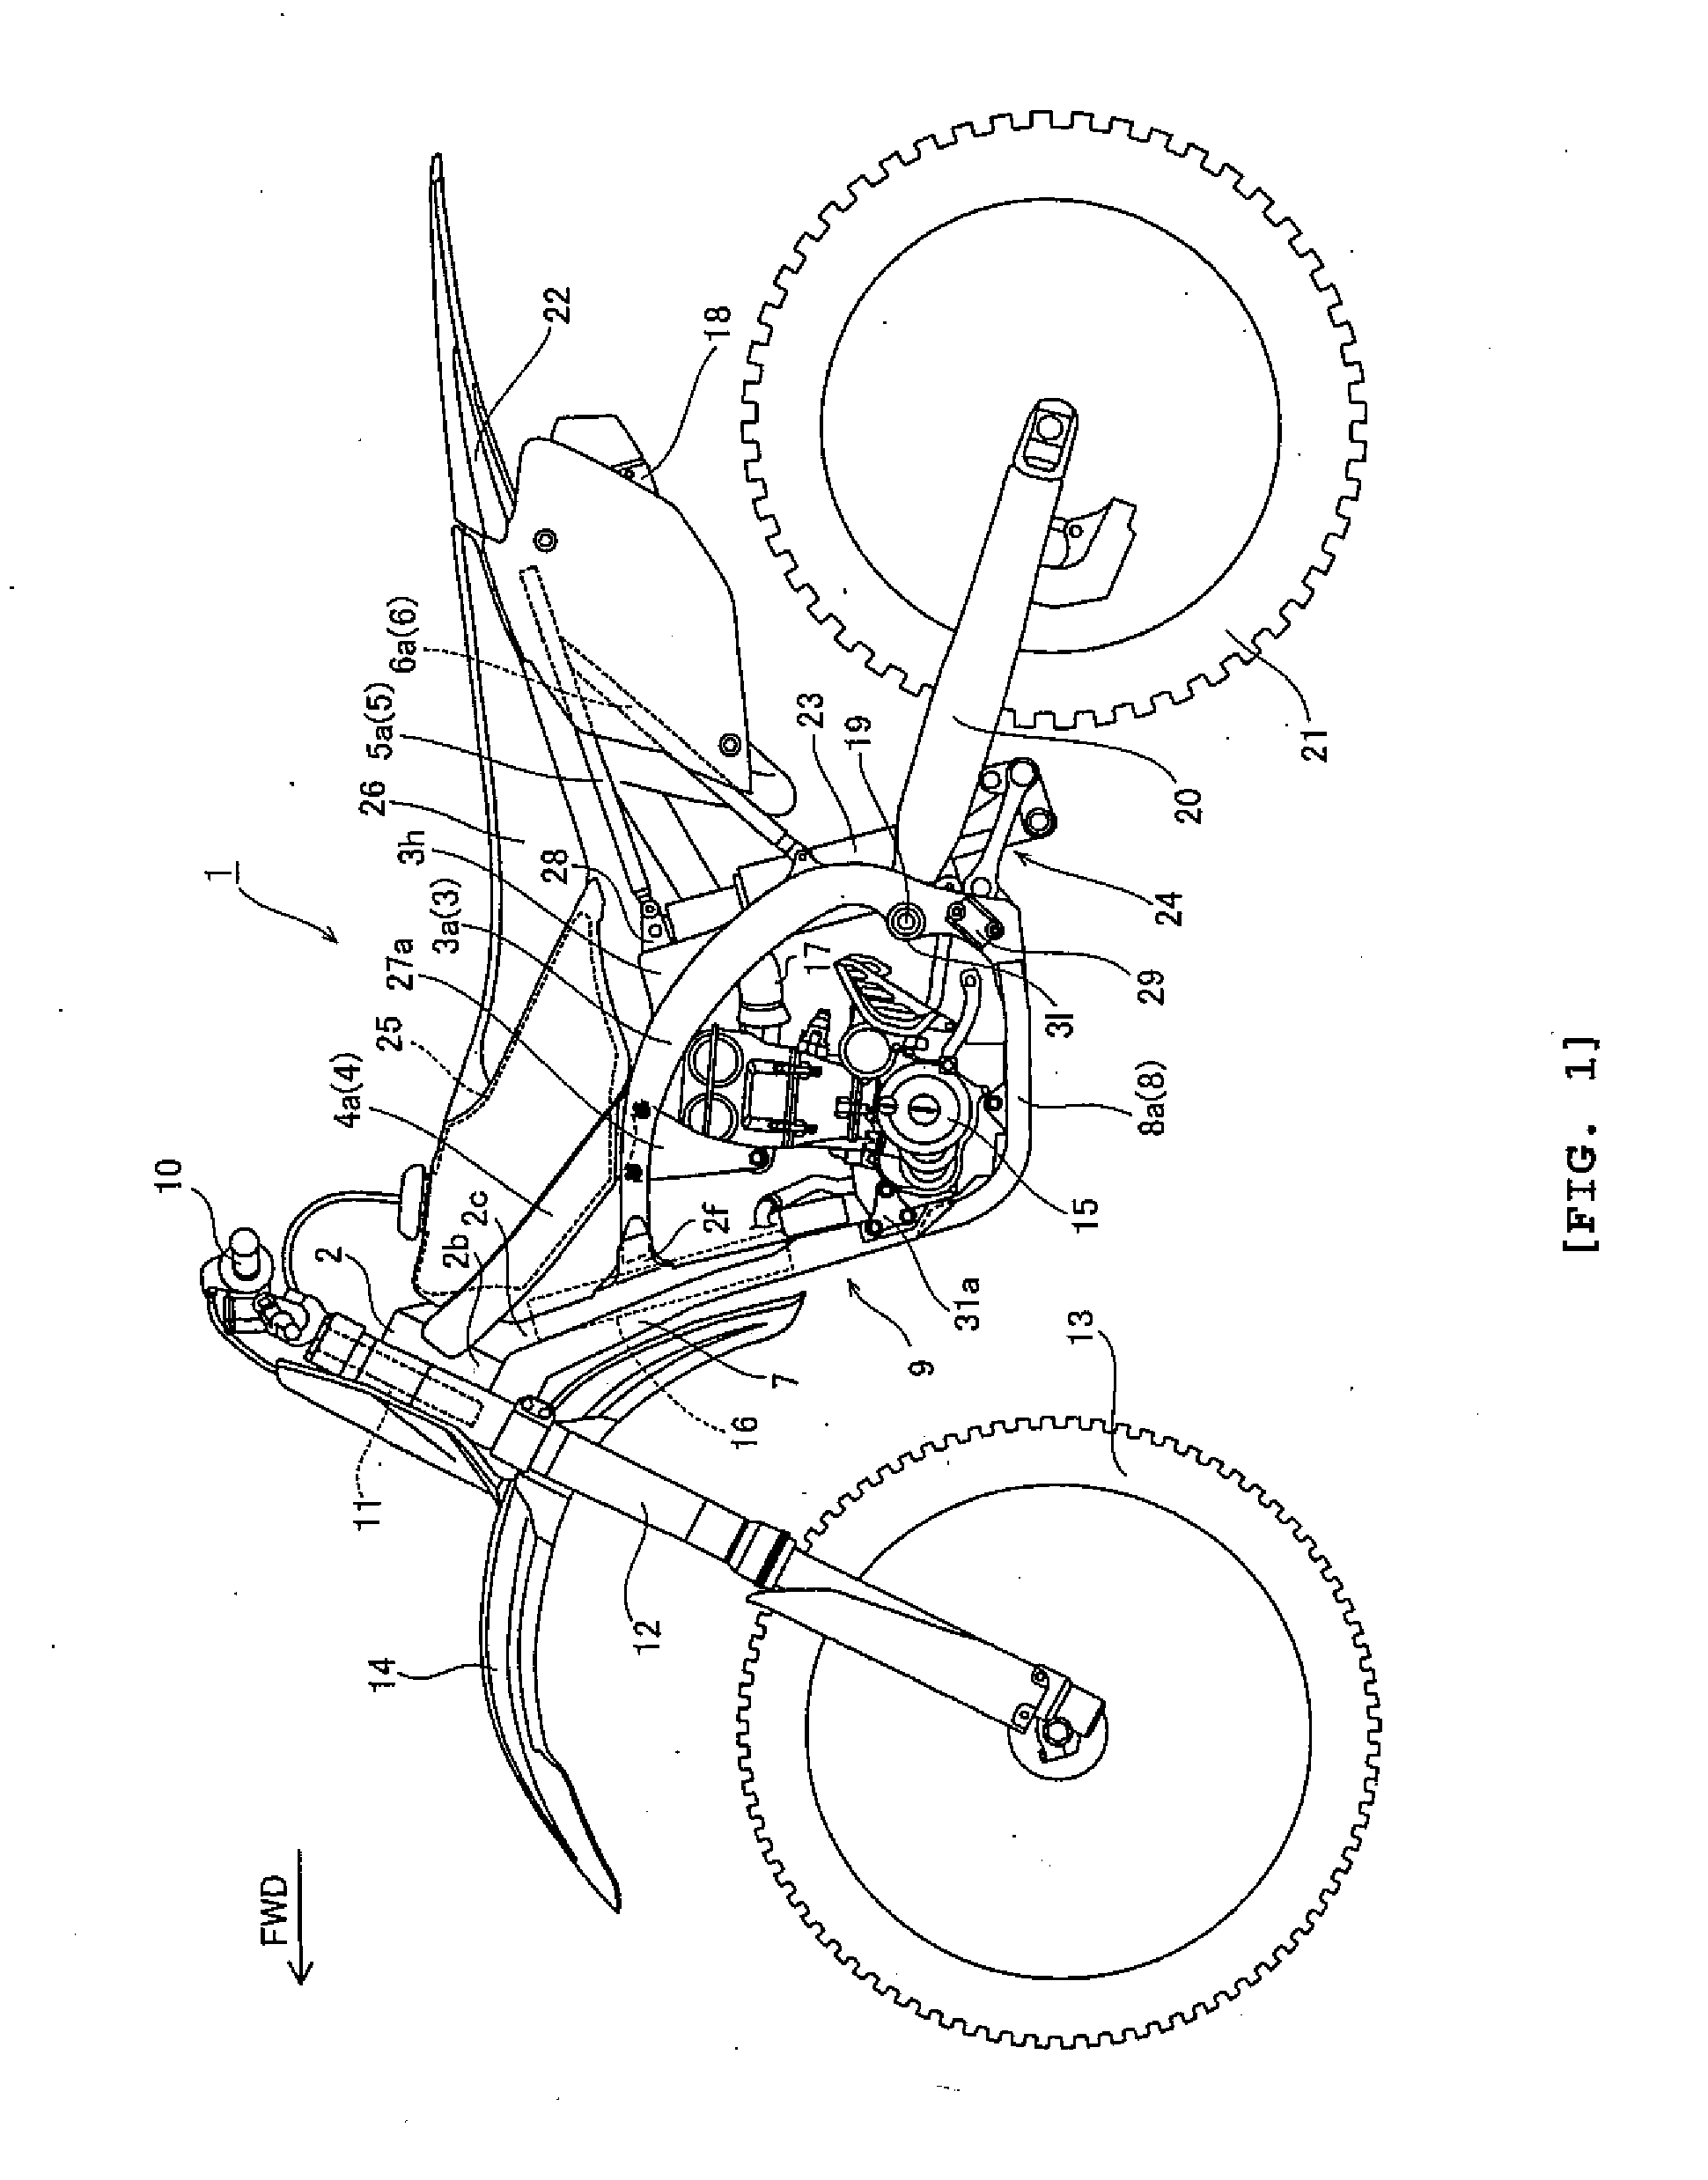 Body Frame and Vehicle